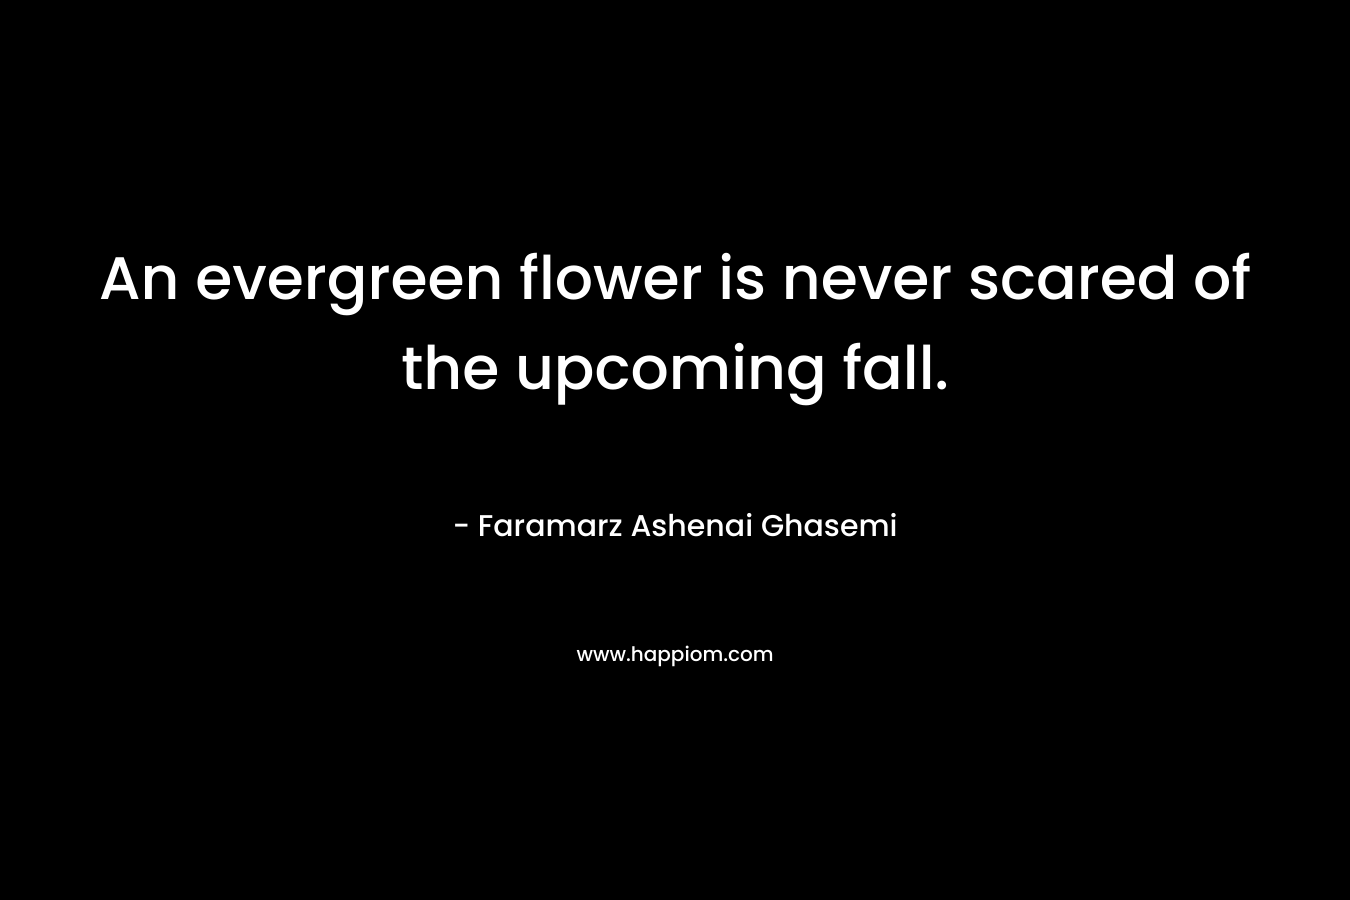 An evergreen flower is never scared of the upcoming fall. – Faramarz Ashenai Ghasemi